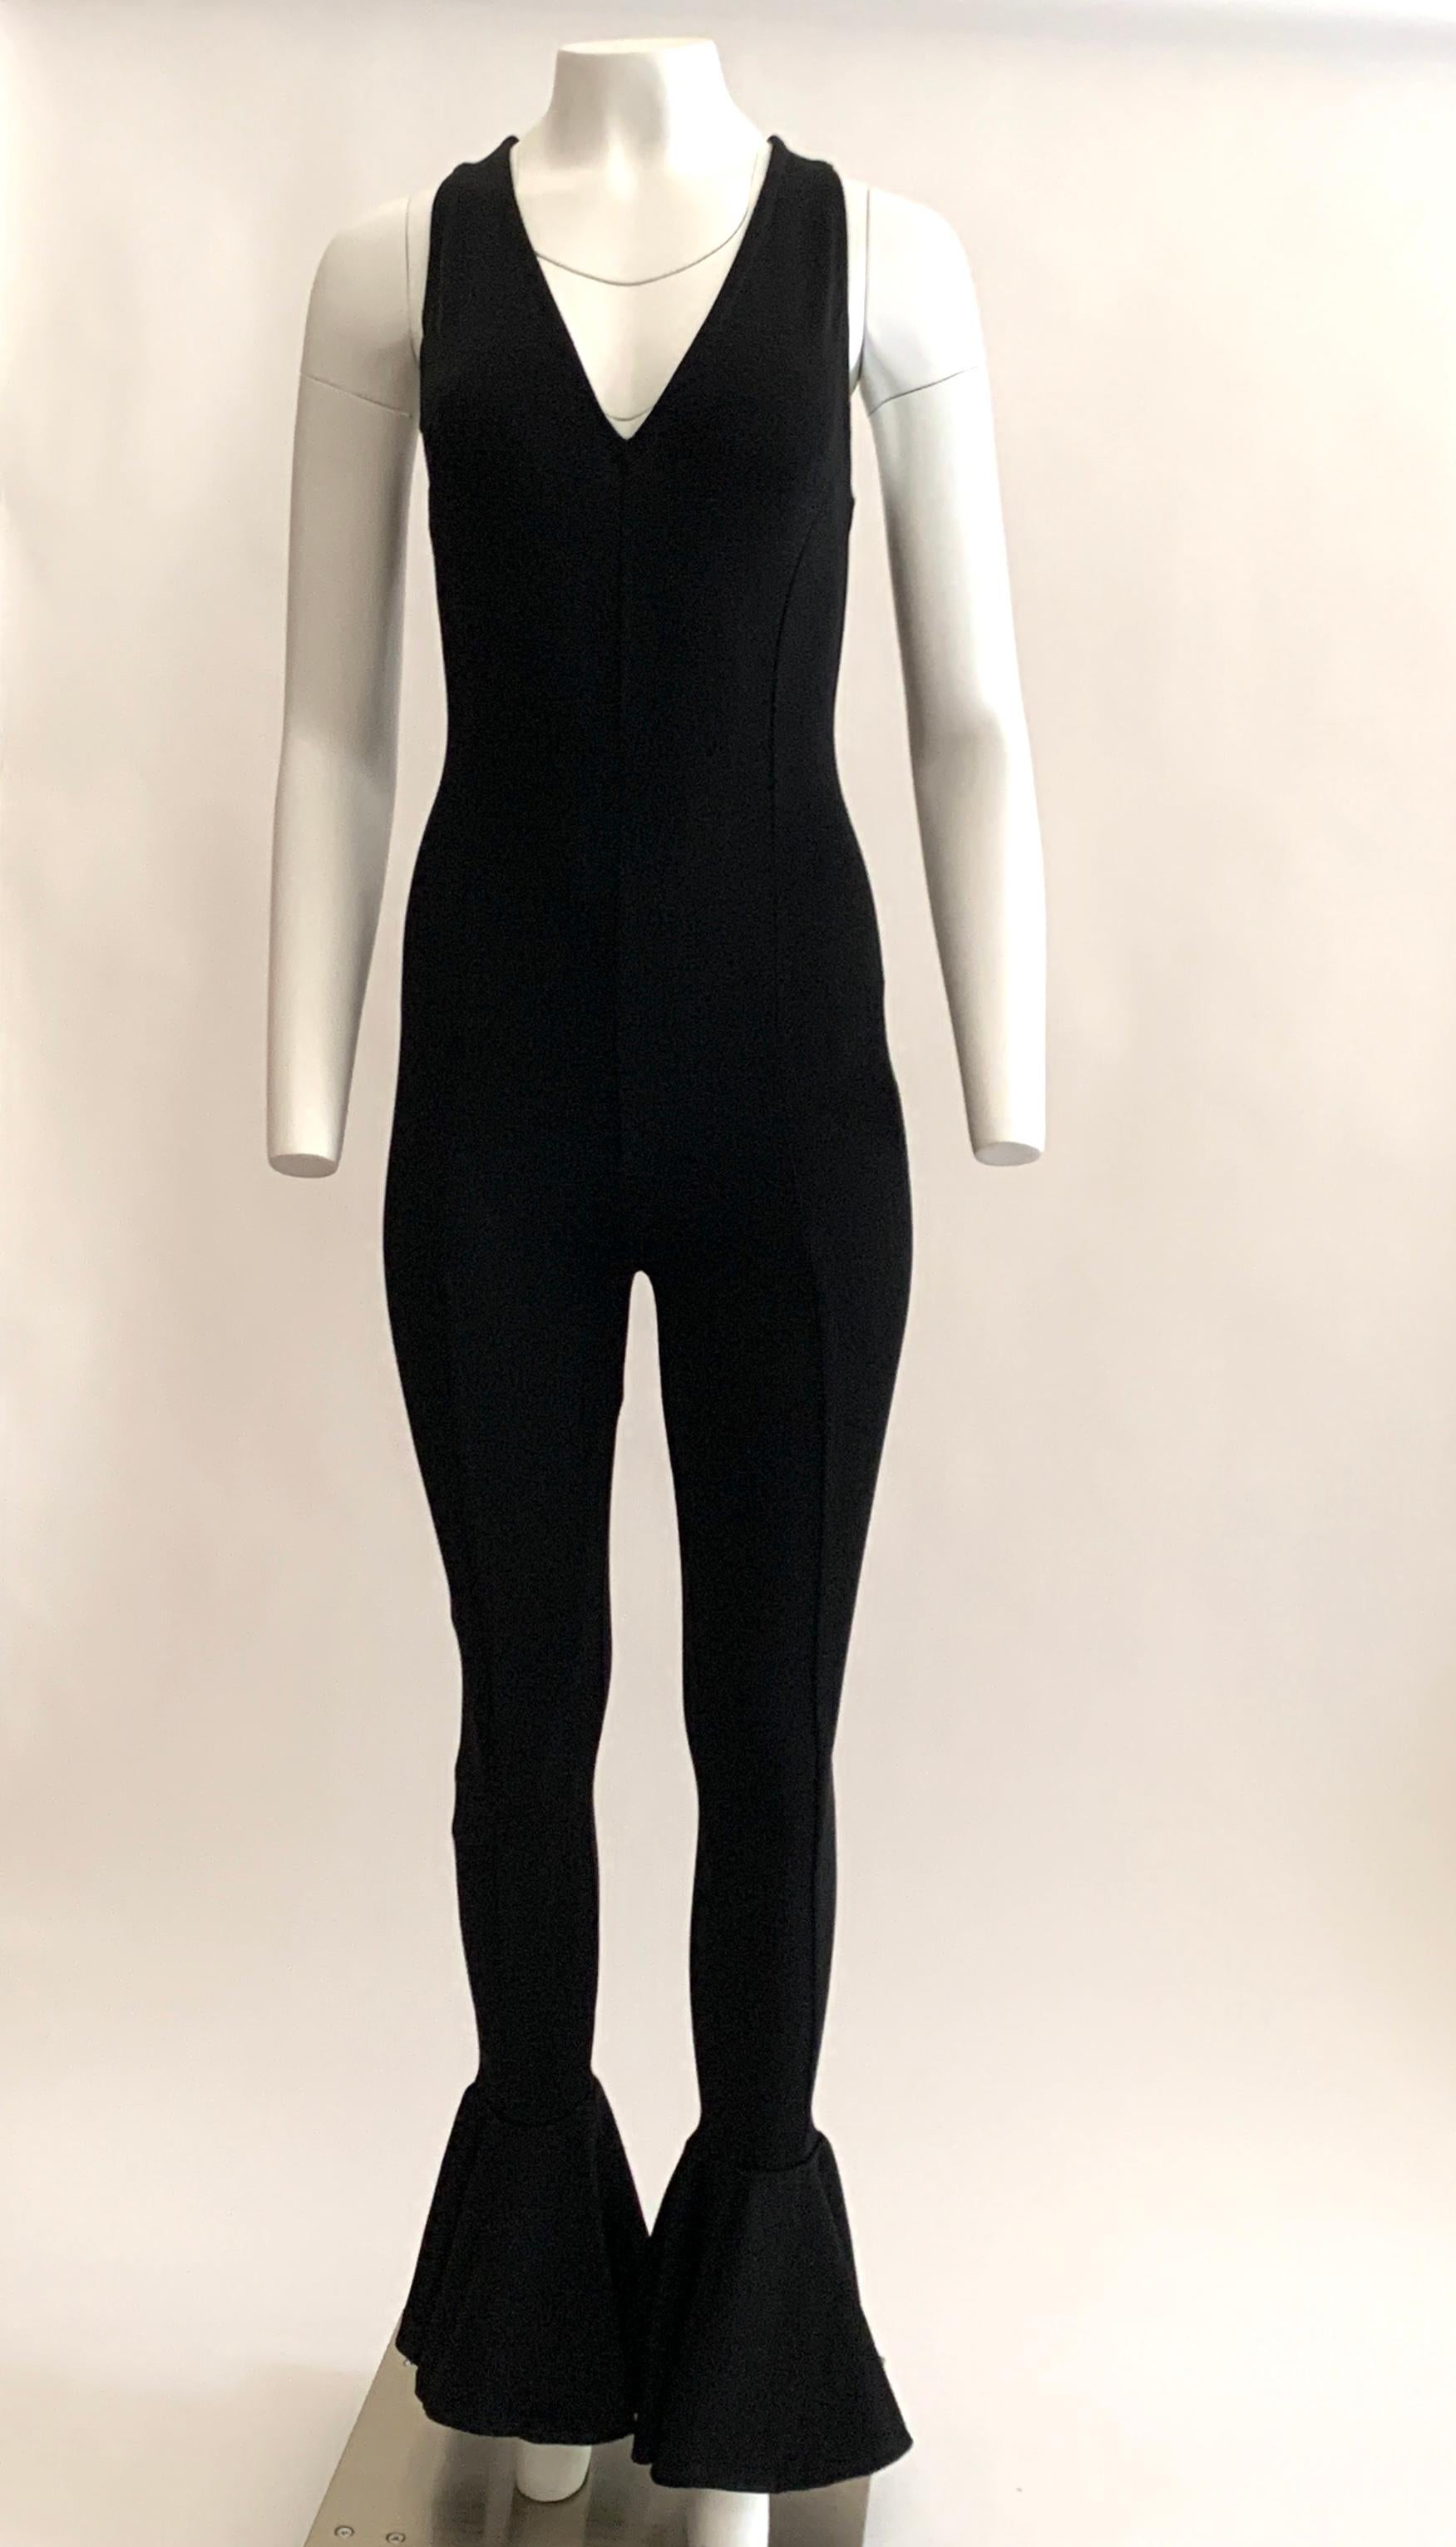 Gianni Versace Couture vintage 1990s black knit sleeveless fit and flare jumpsuit with deep v neck at front and wide opening at ankle. Seams run from top to bottom at front, back and sides to create an amazing long look. Back zip and hook and loop